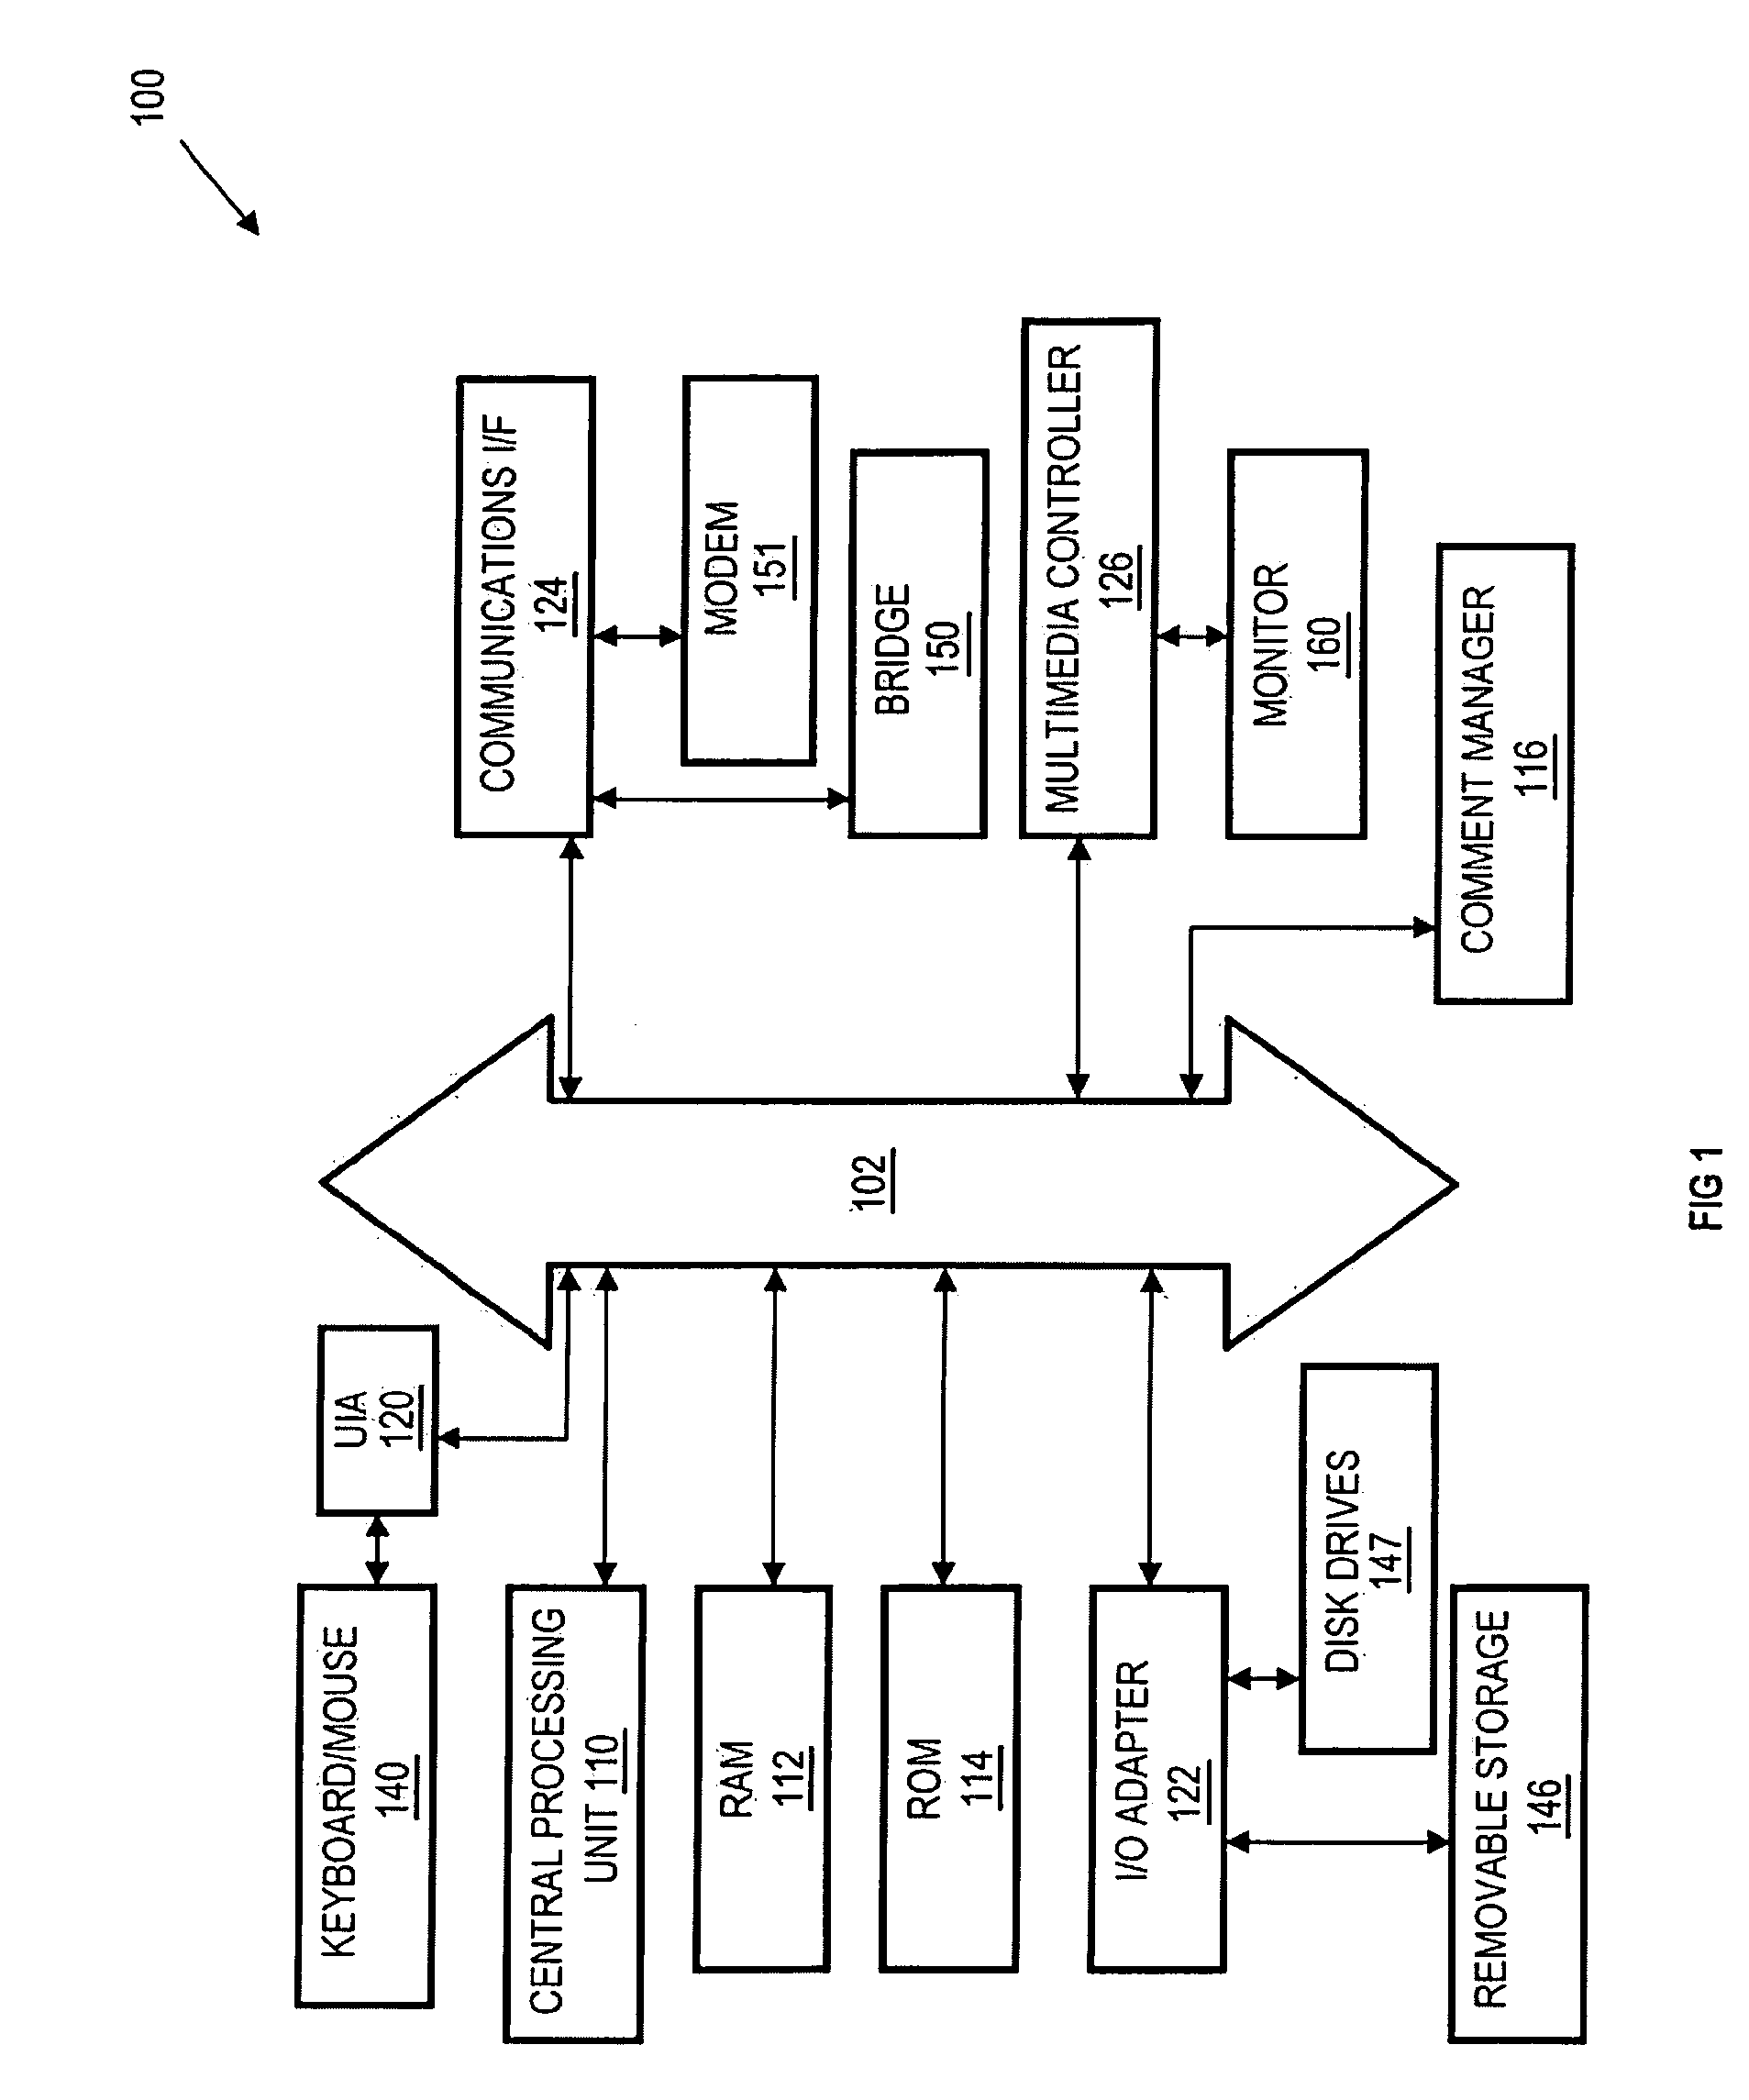 Systems and Methods for Managing Data Associated with Computer Code